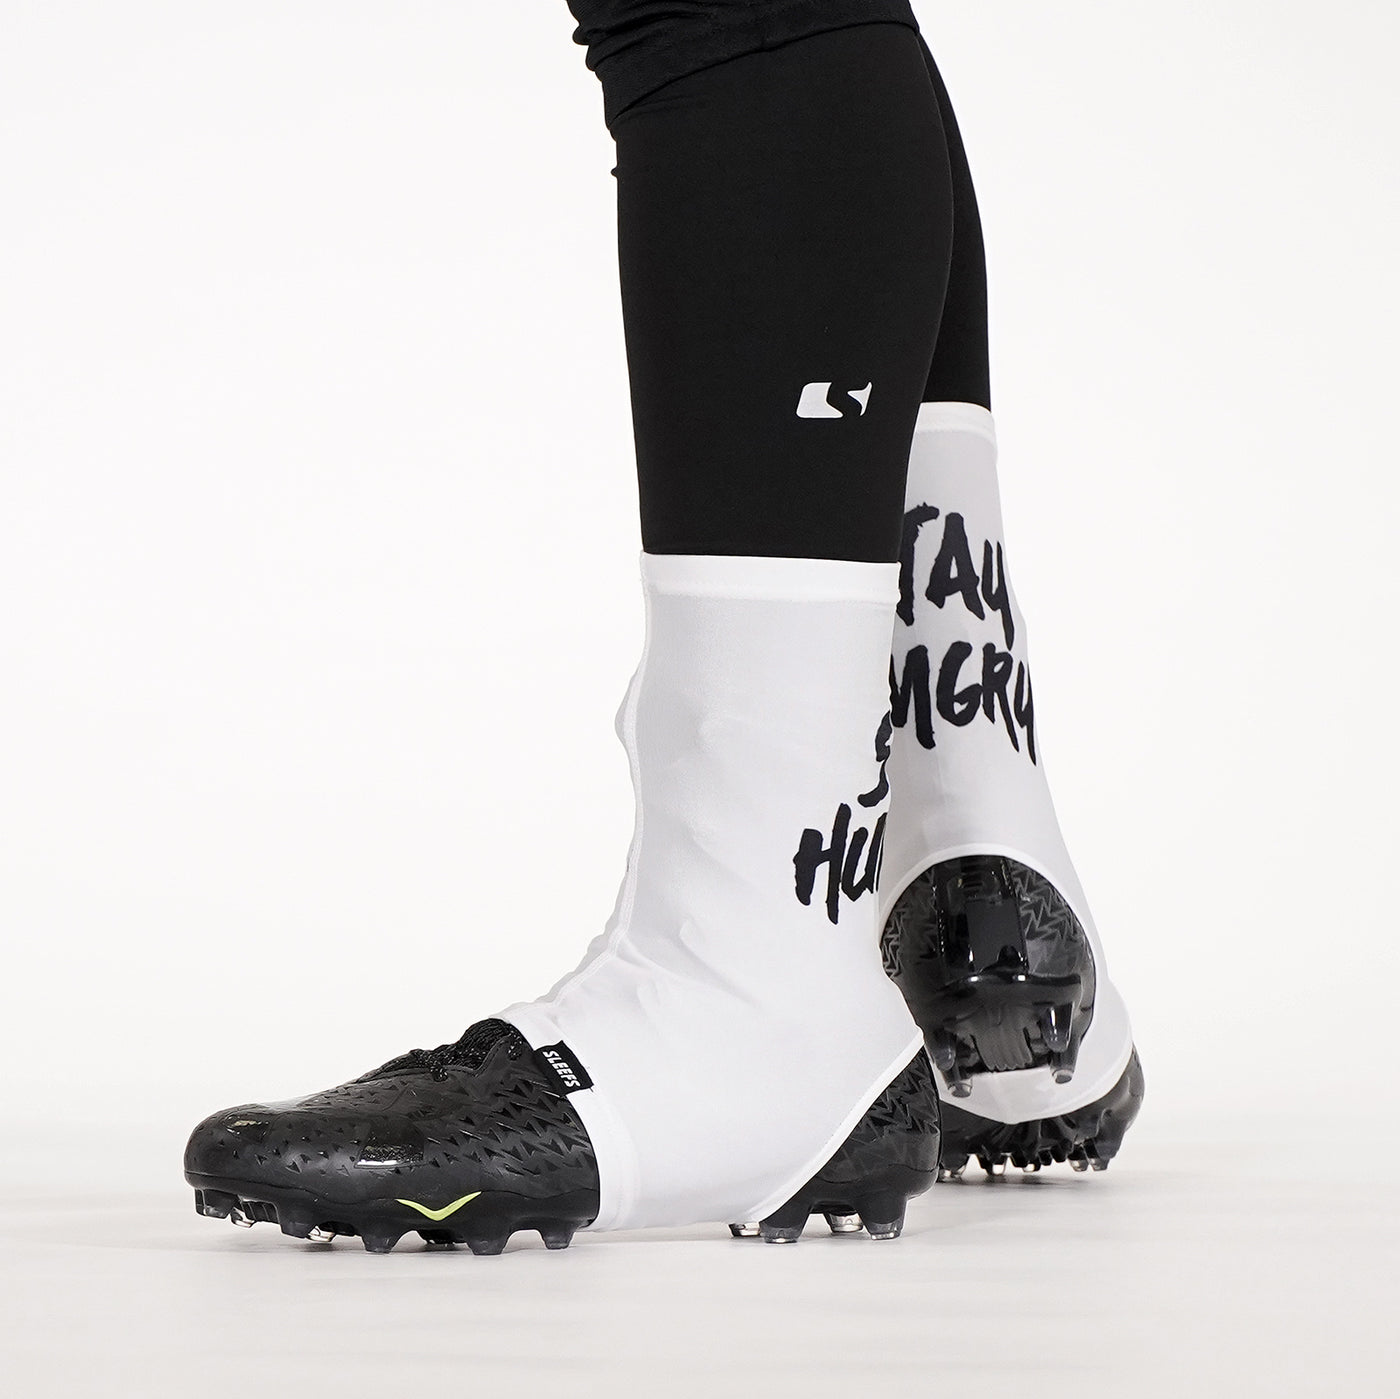 Stay Hungry White Spats / Cleat Covers